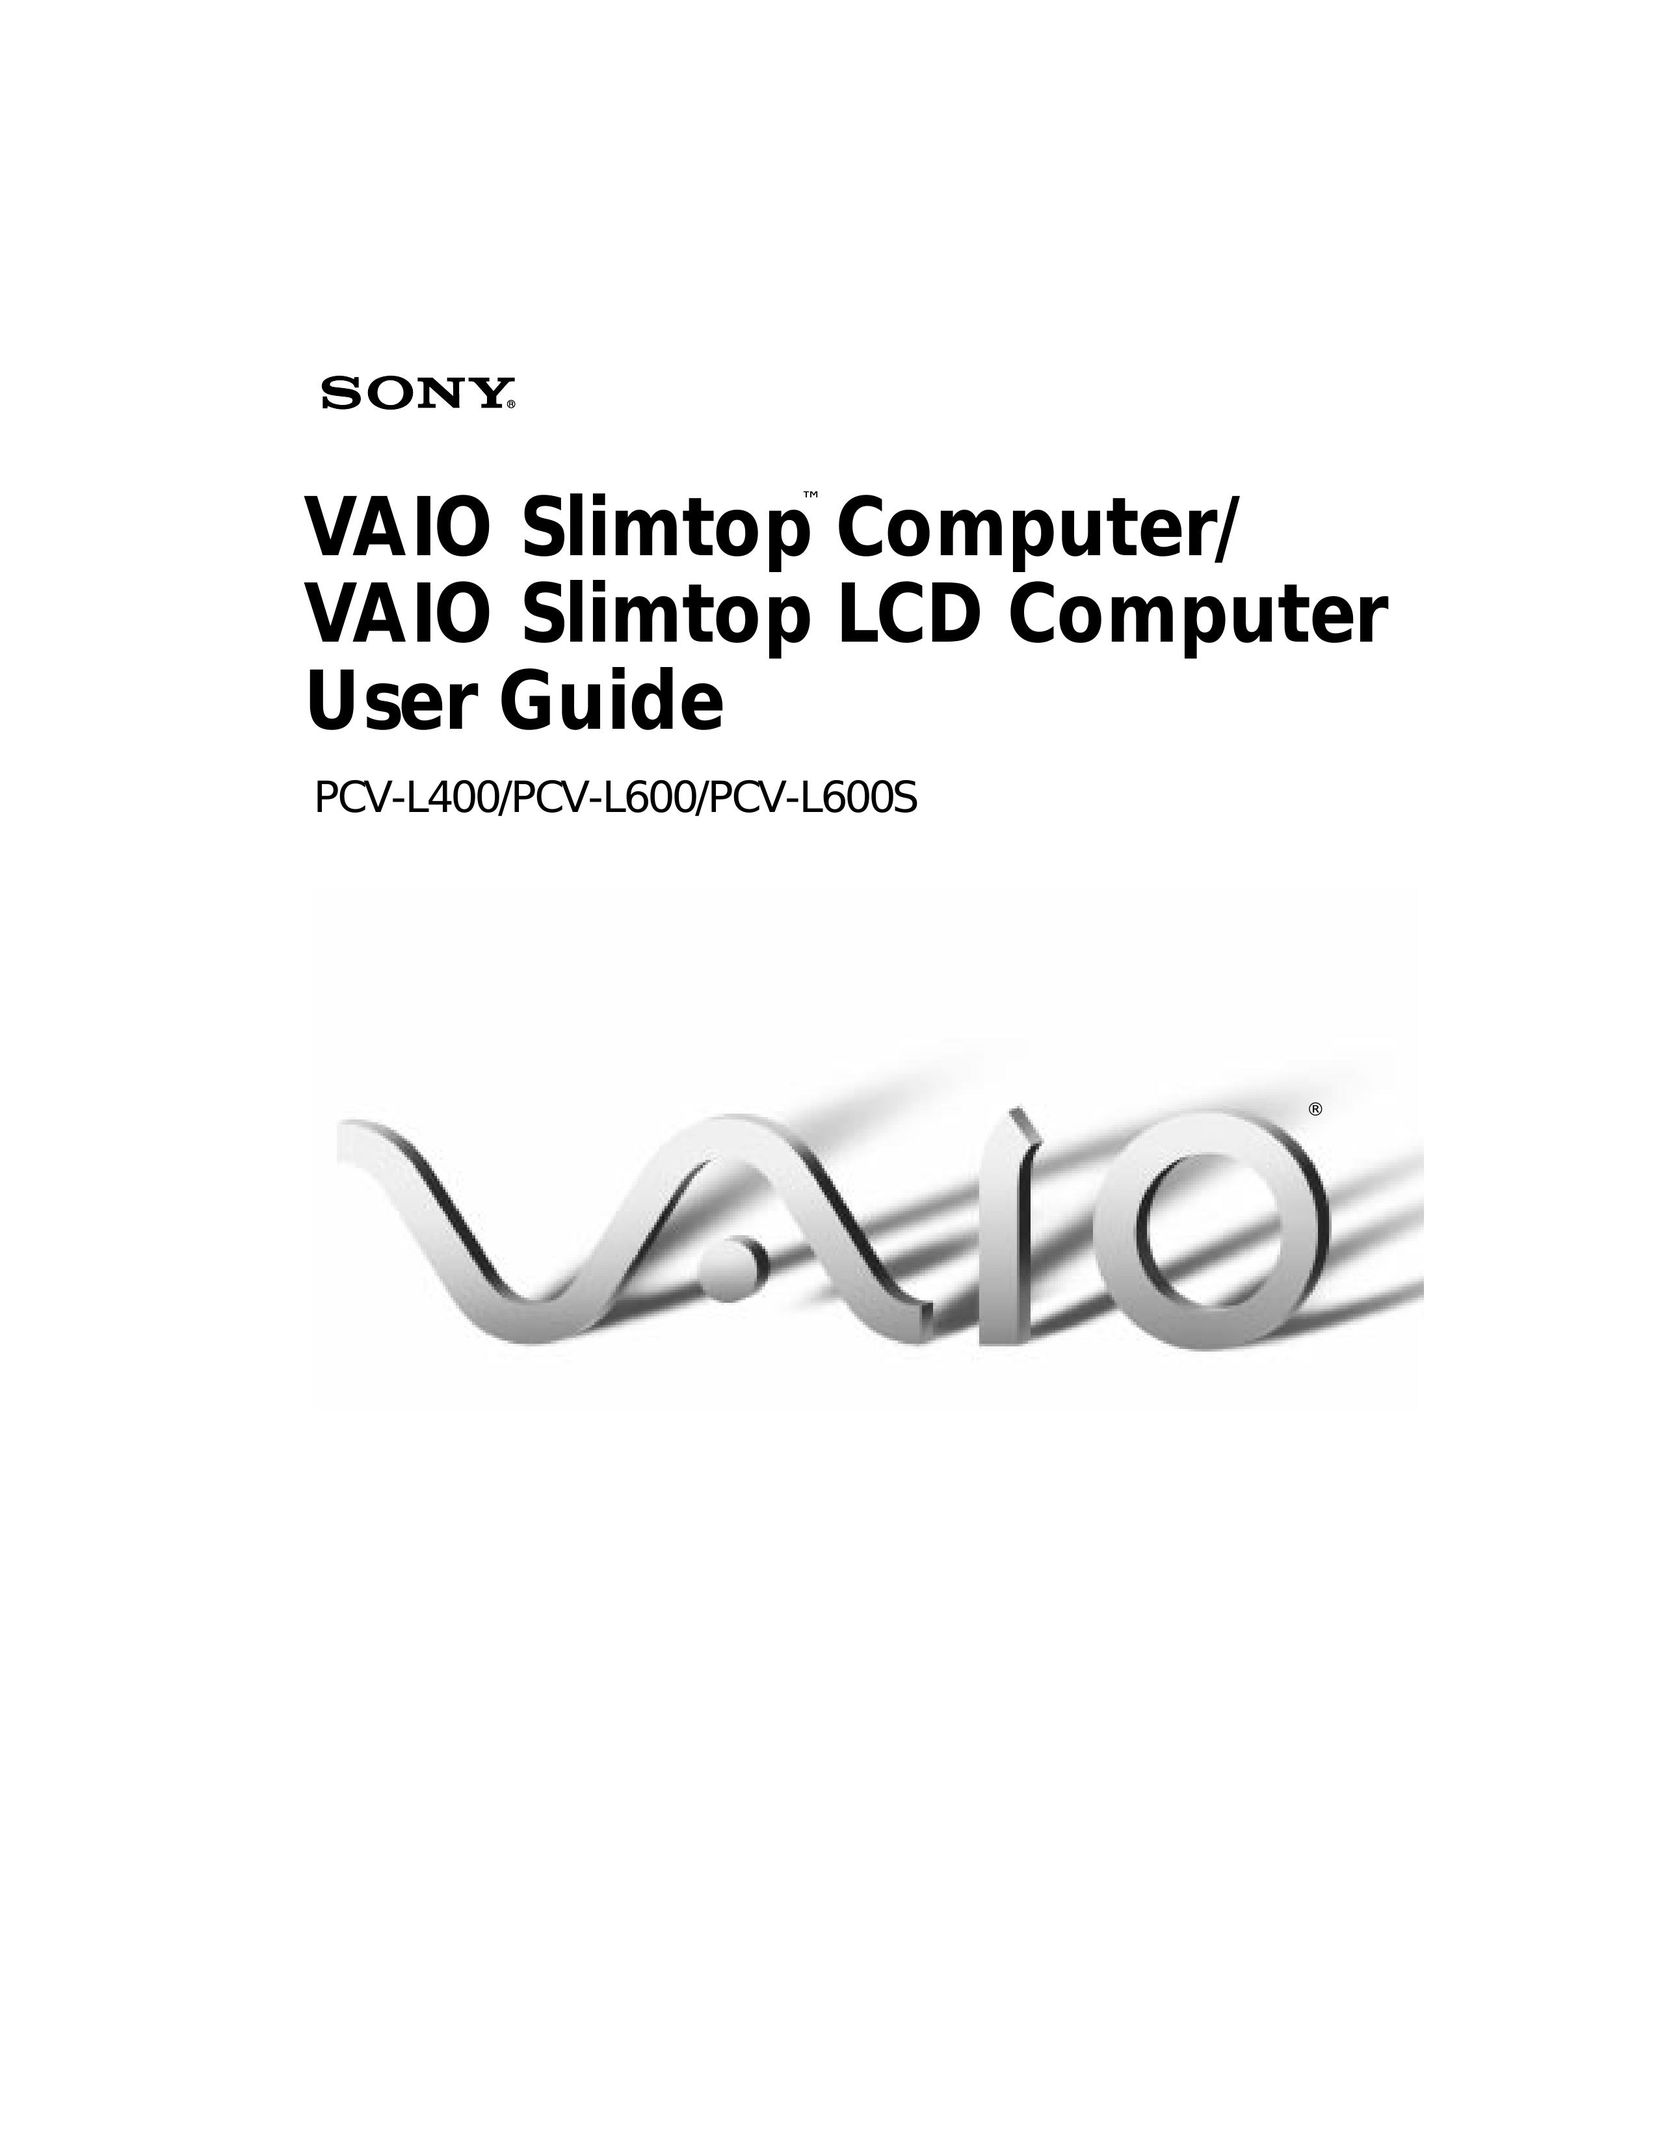 Sony PCV-L600 Personal Computer User Manual